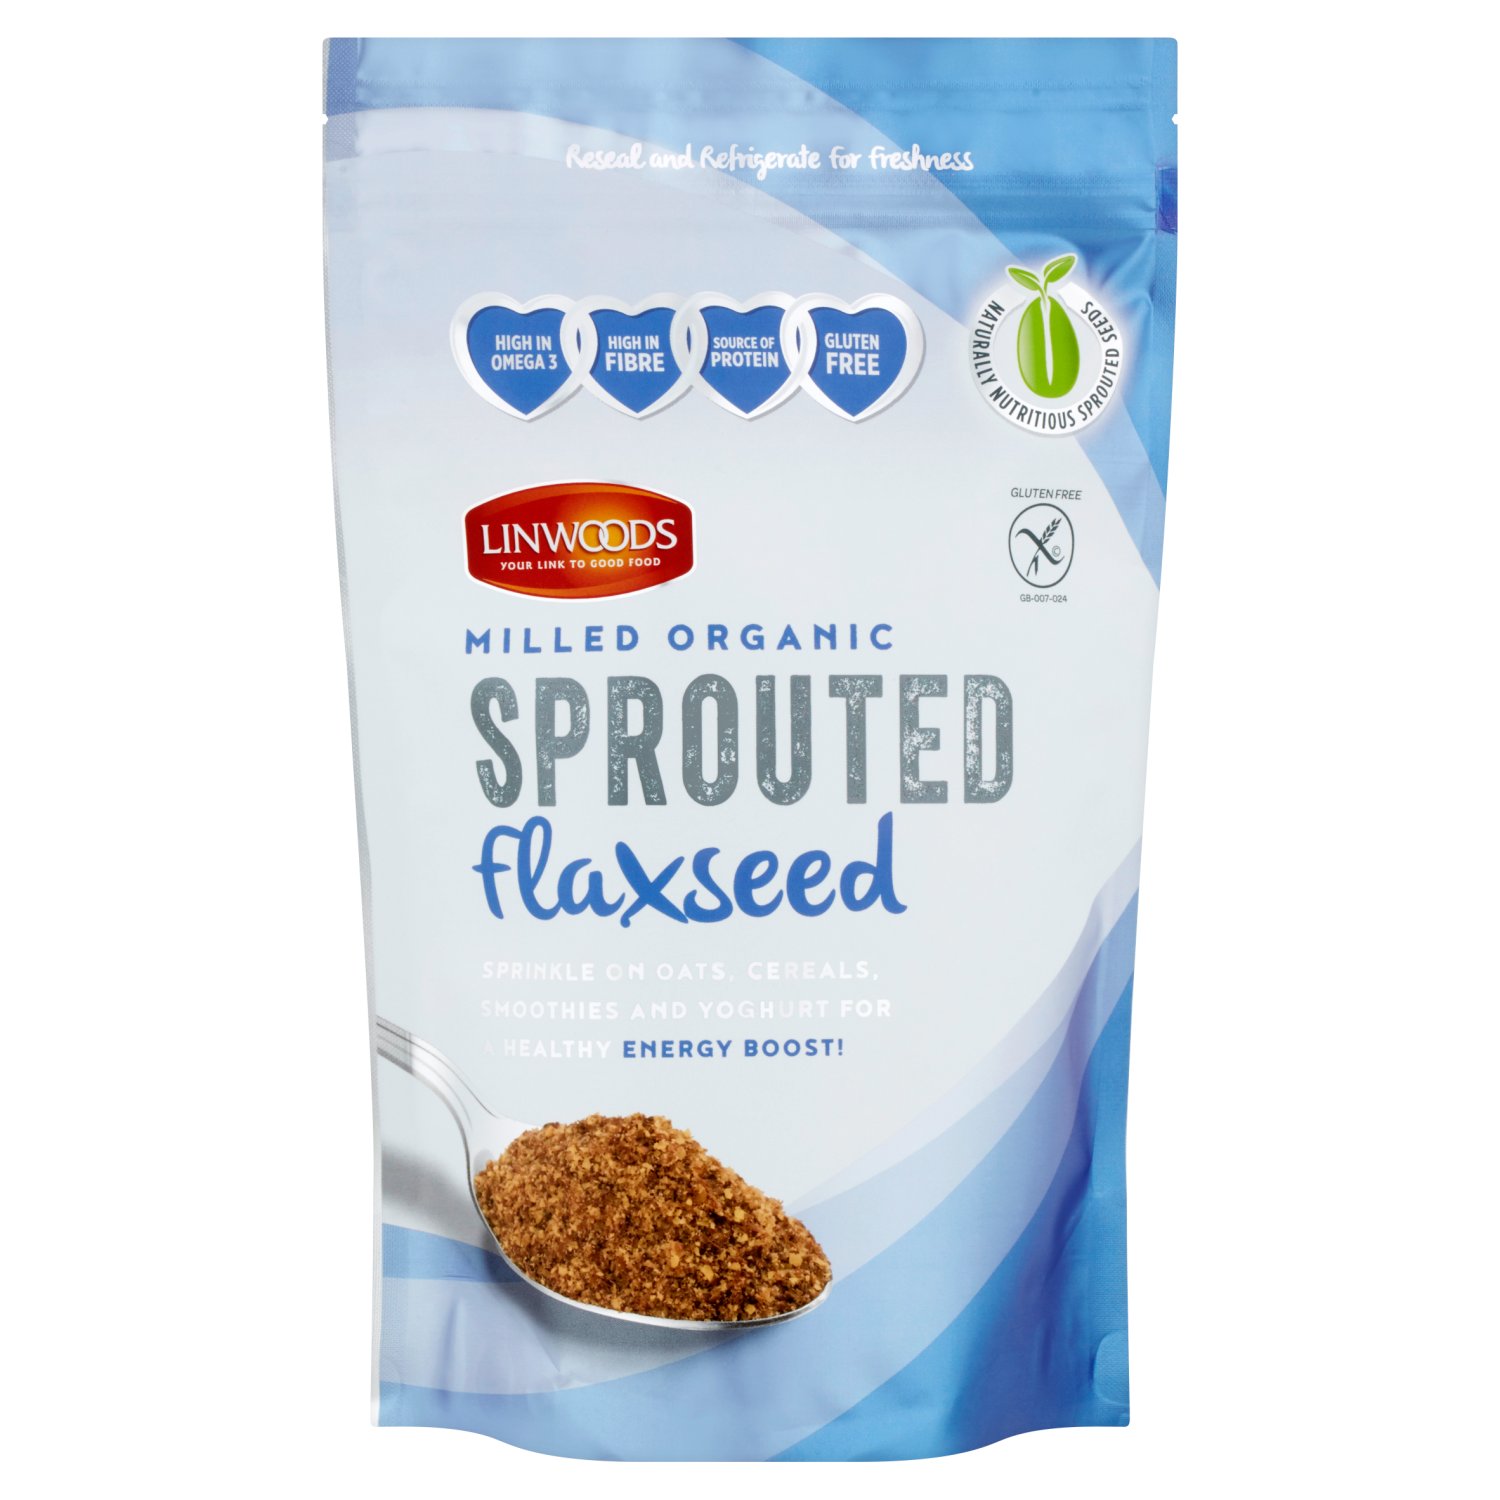 Linwoods Organic Milled Sprouted Flaxseed (360 g)